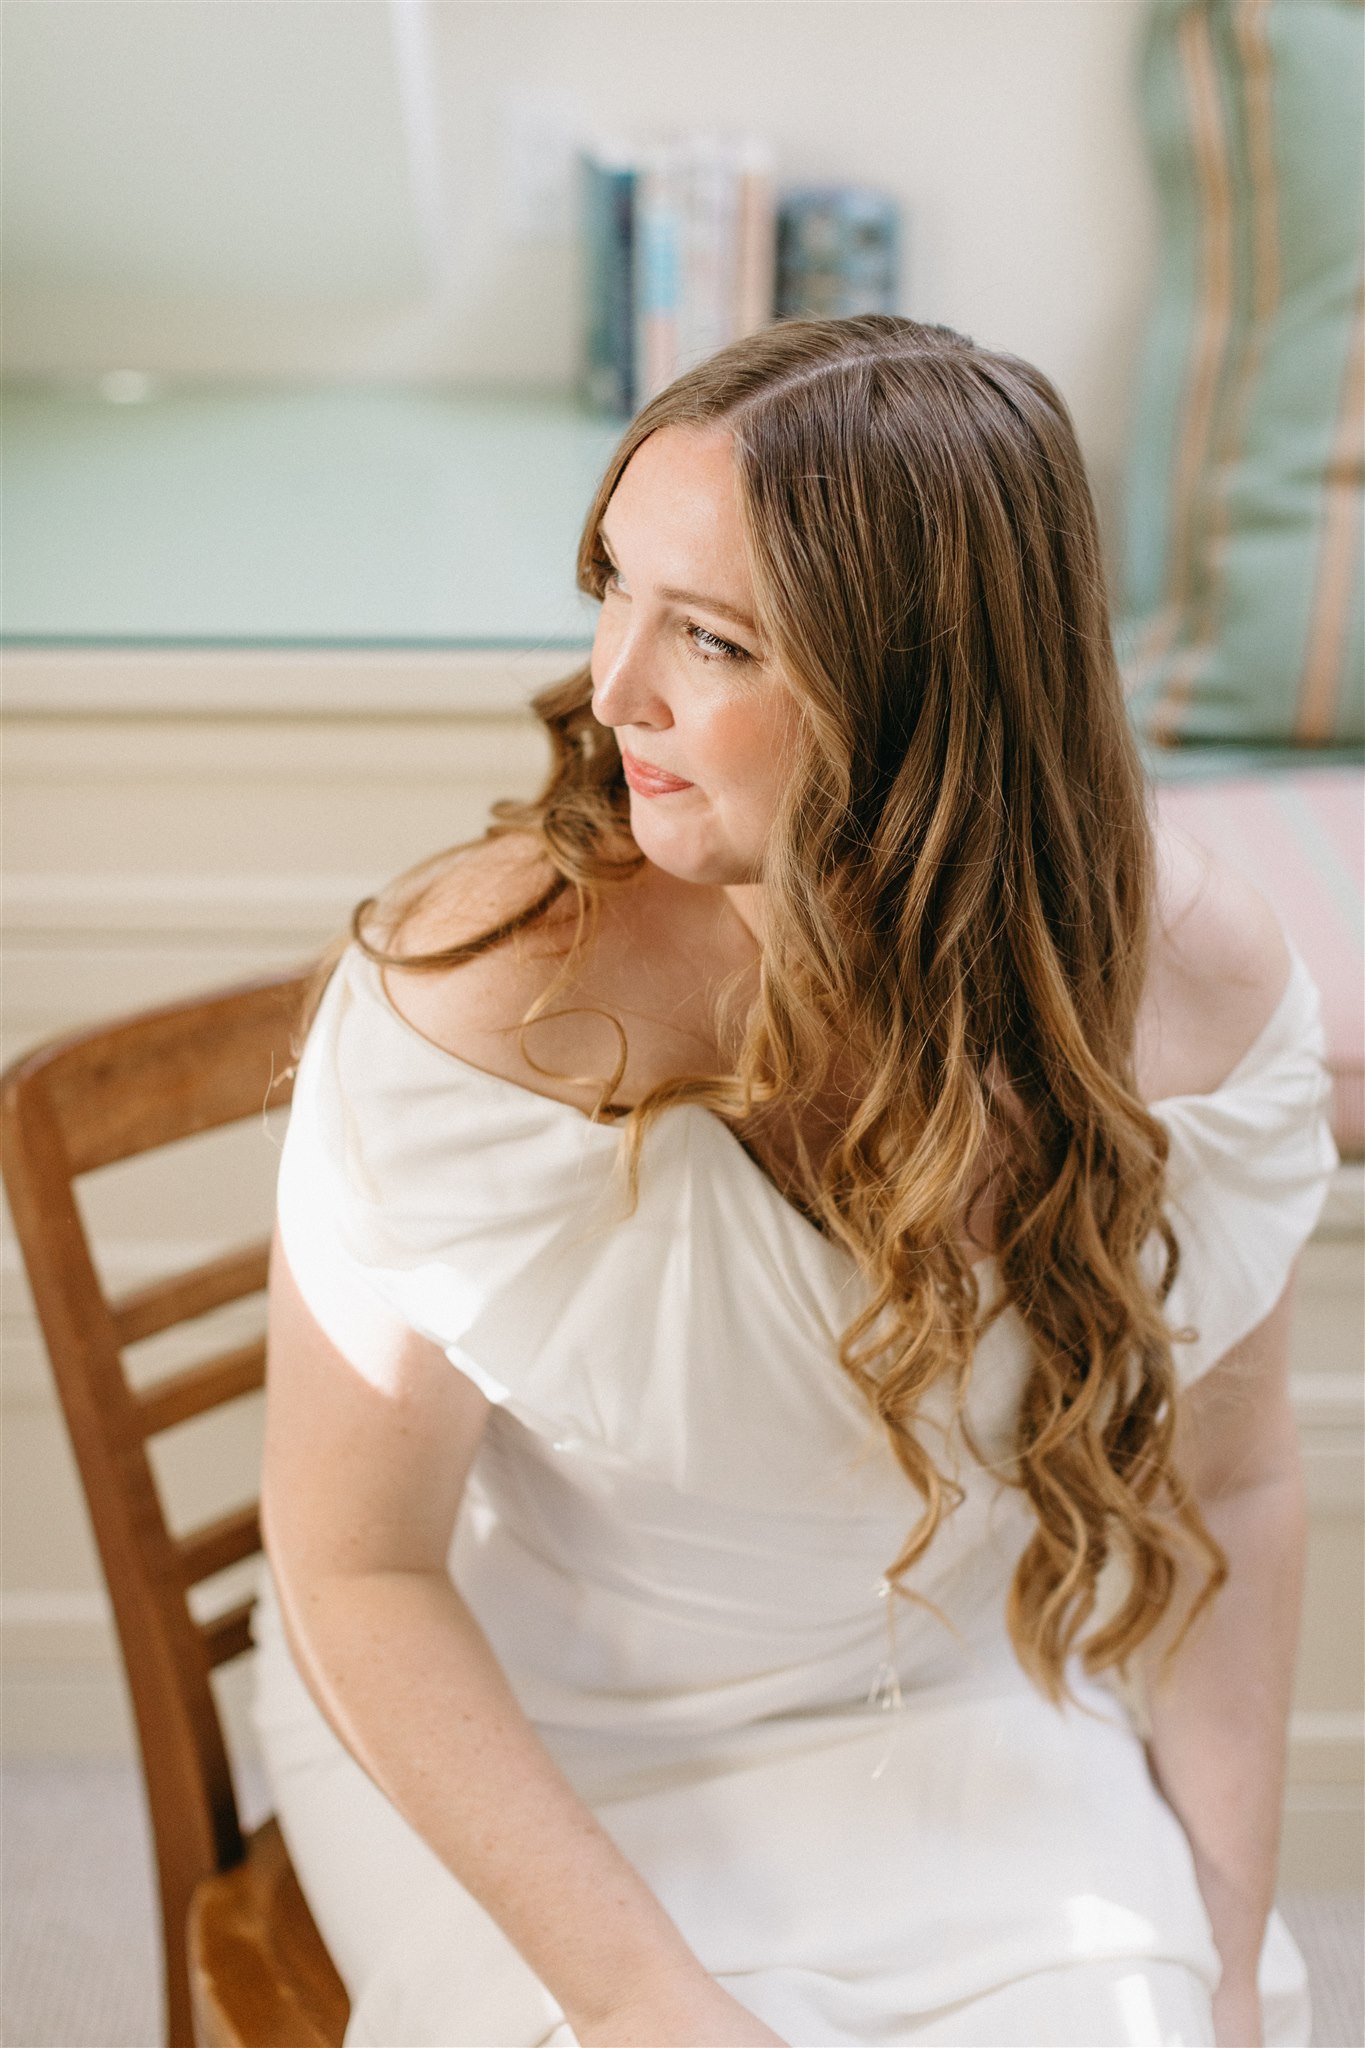 natural airbrush makeup and hair down with loose waves was the perfect style to accompany this bride's chic, garden party style backyard wedding 